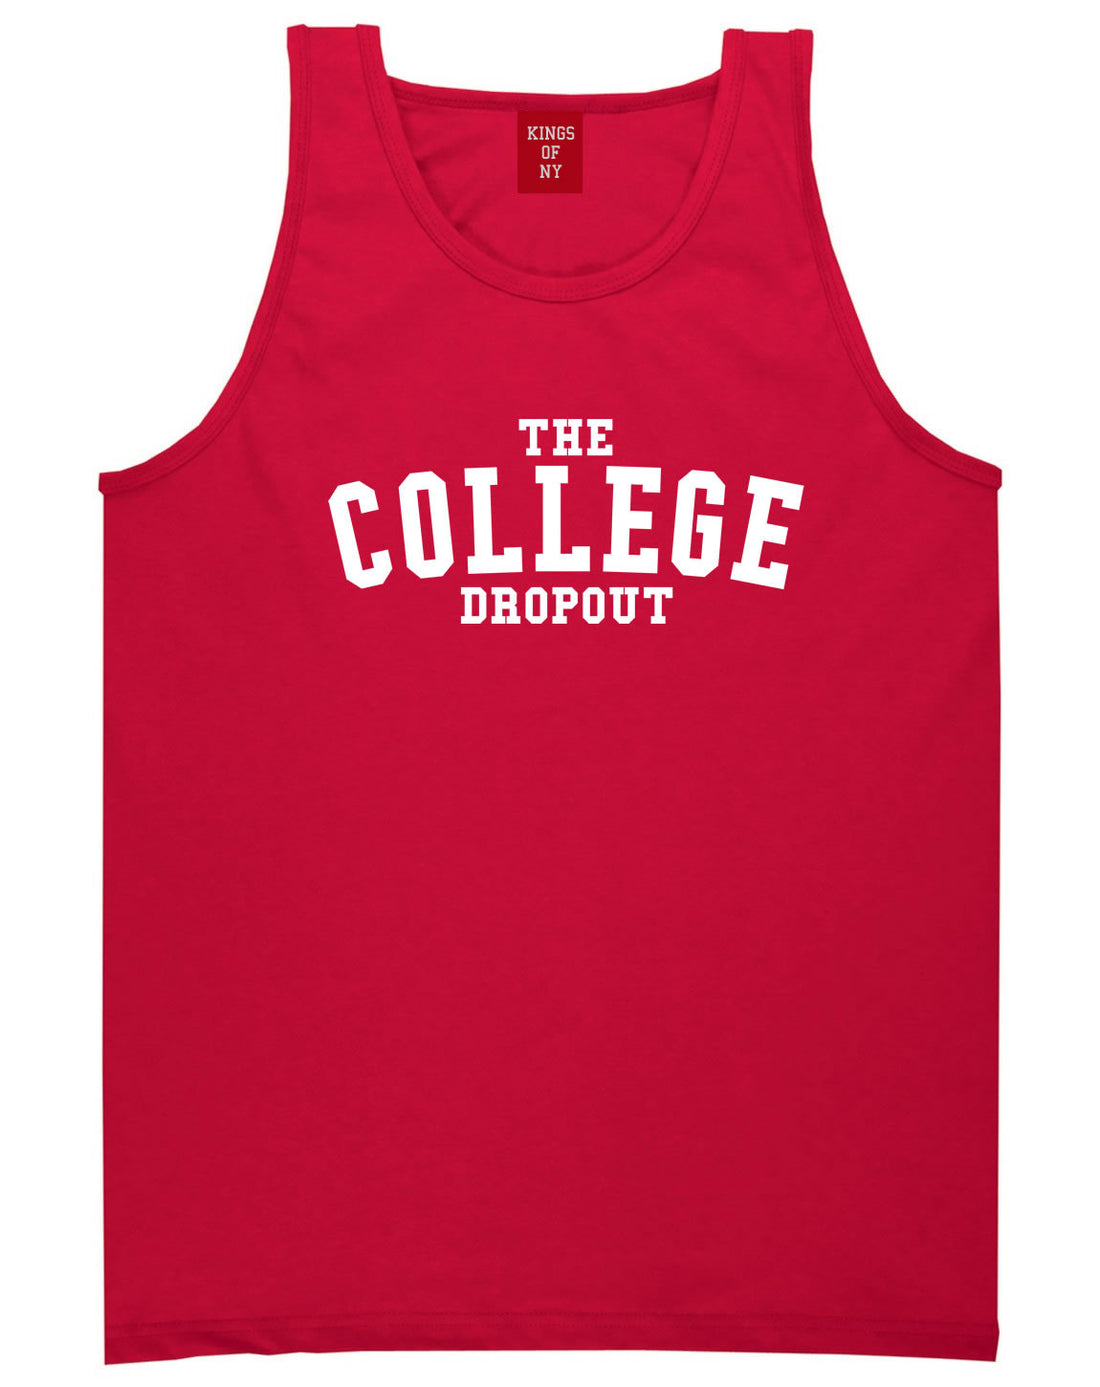 The College Dropout Album High School Tank Top in Red By Kings Of NY